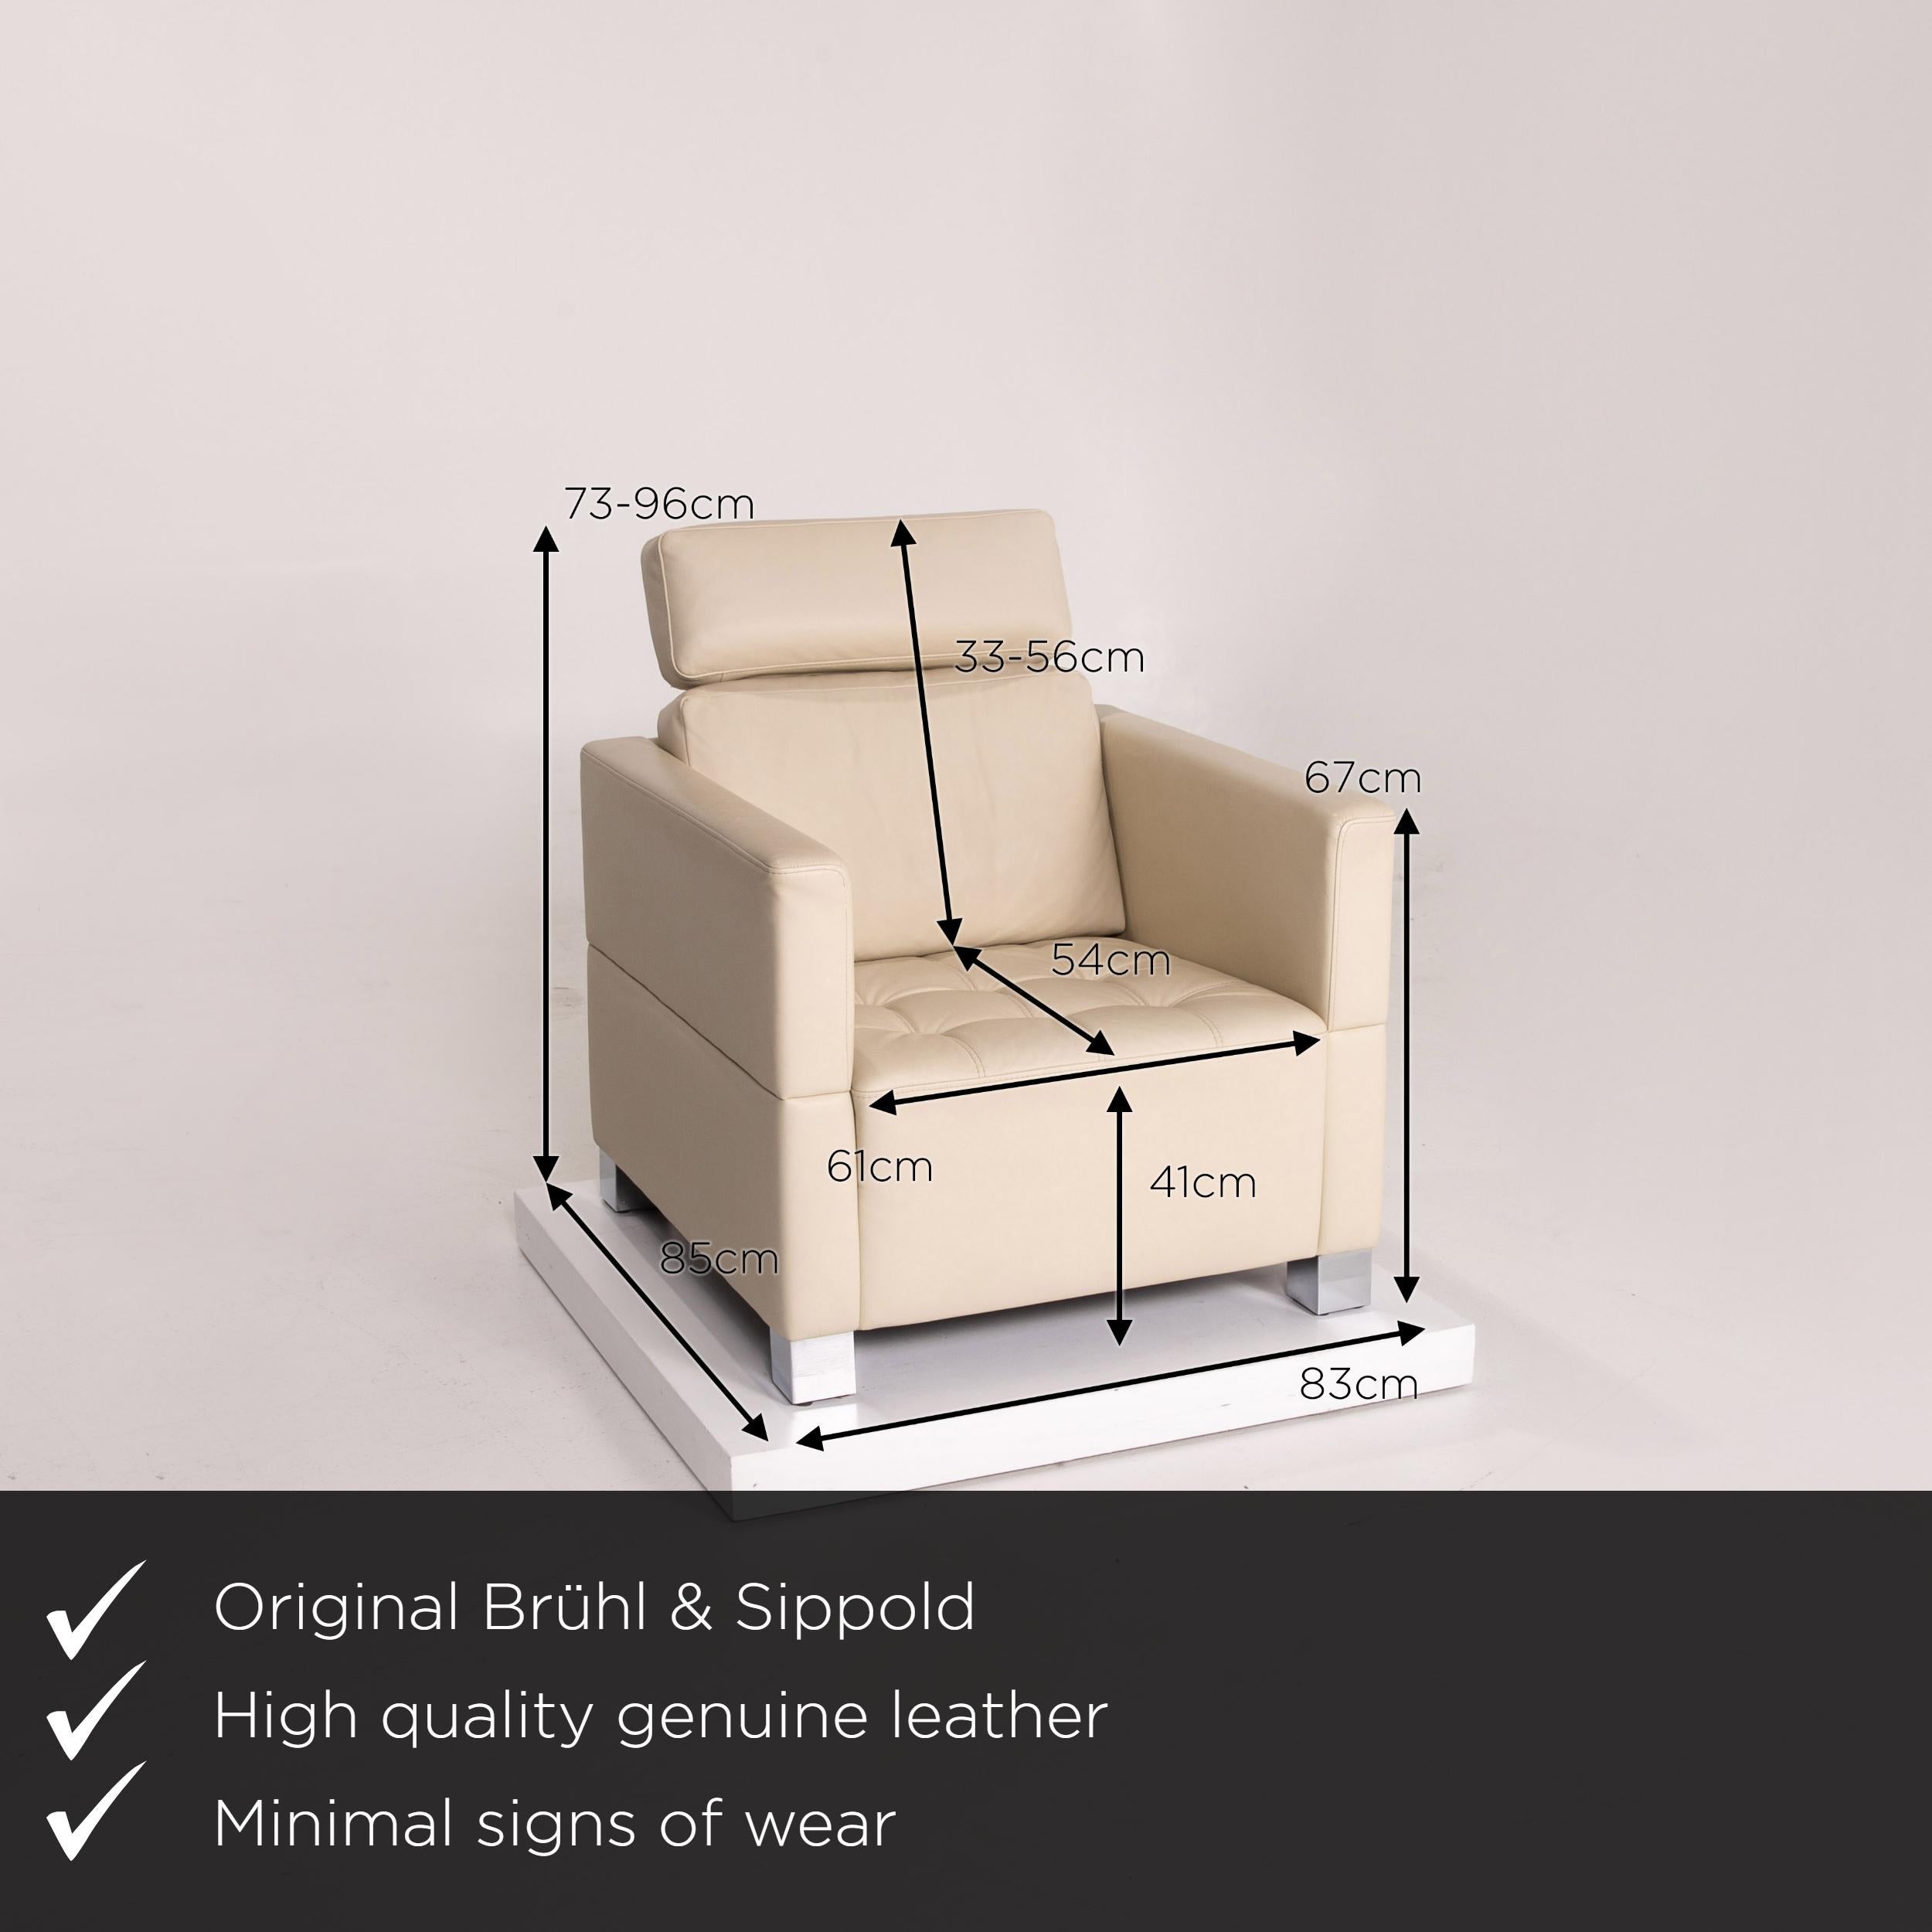 We present to you a Brühl & Sippold leather armchair set cream 1x armchair 1x stool.
    
 

 Product measurements in centimeters:
 

Depth 85
Width 83
Height 73
Seat height 41
Rest height 67
Seat depth 54
Seat width 61
Back height 33.